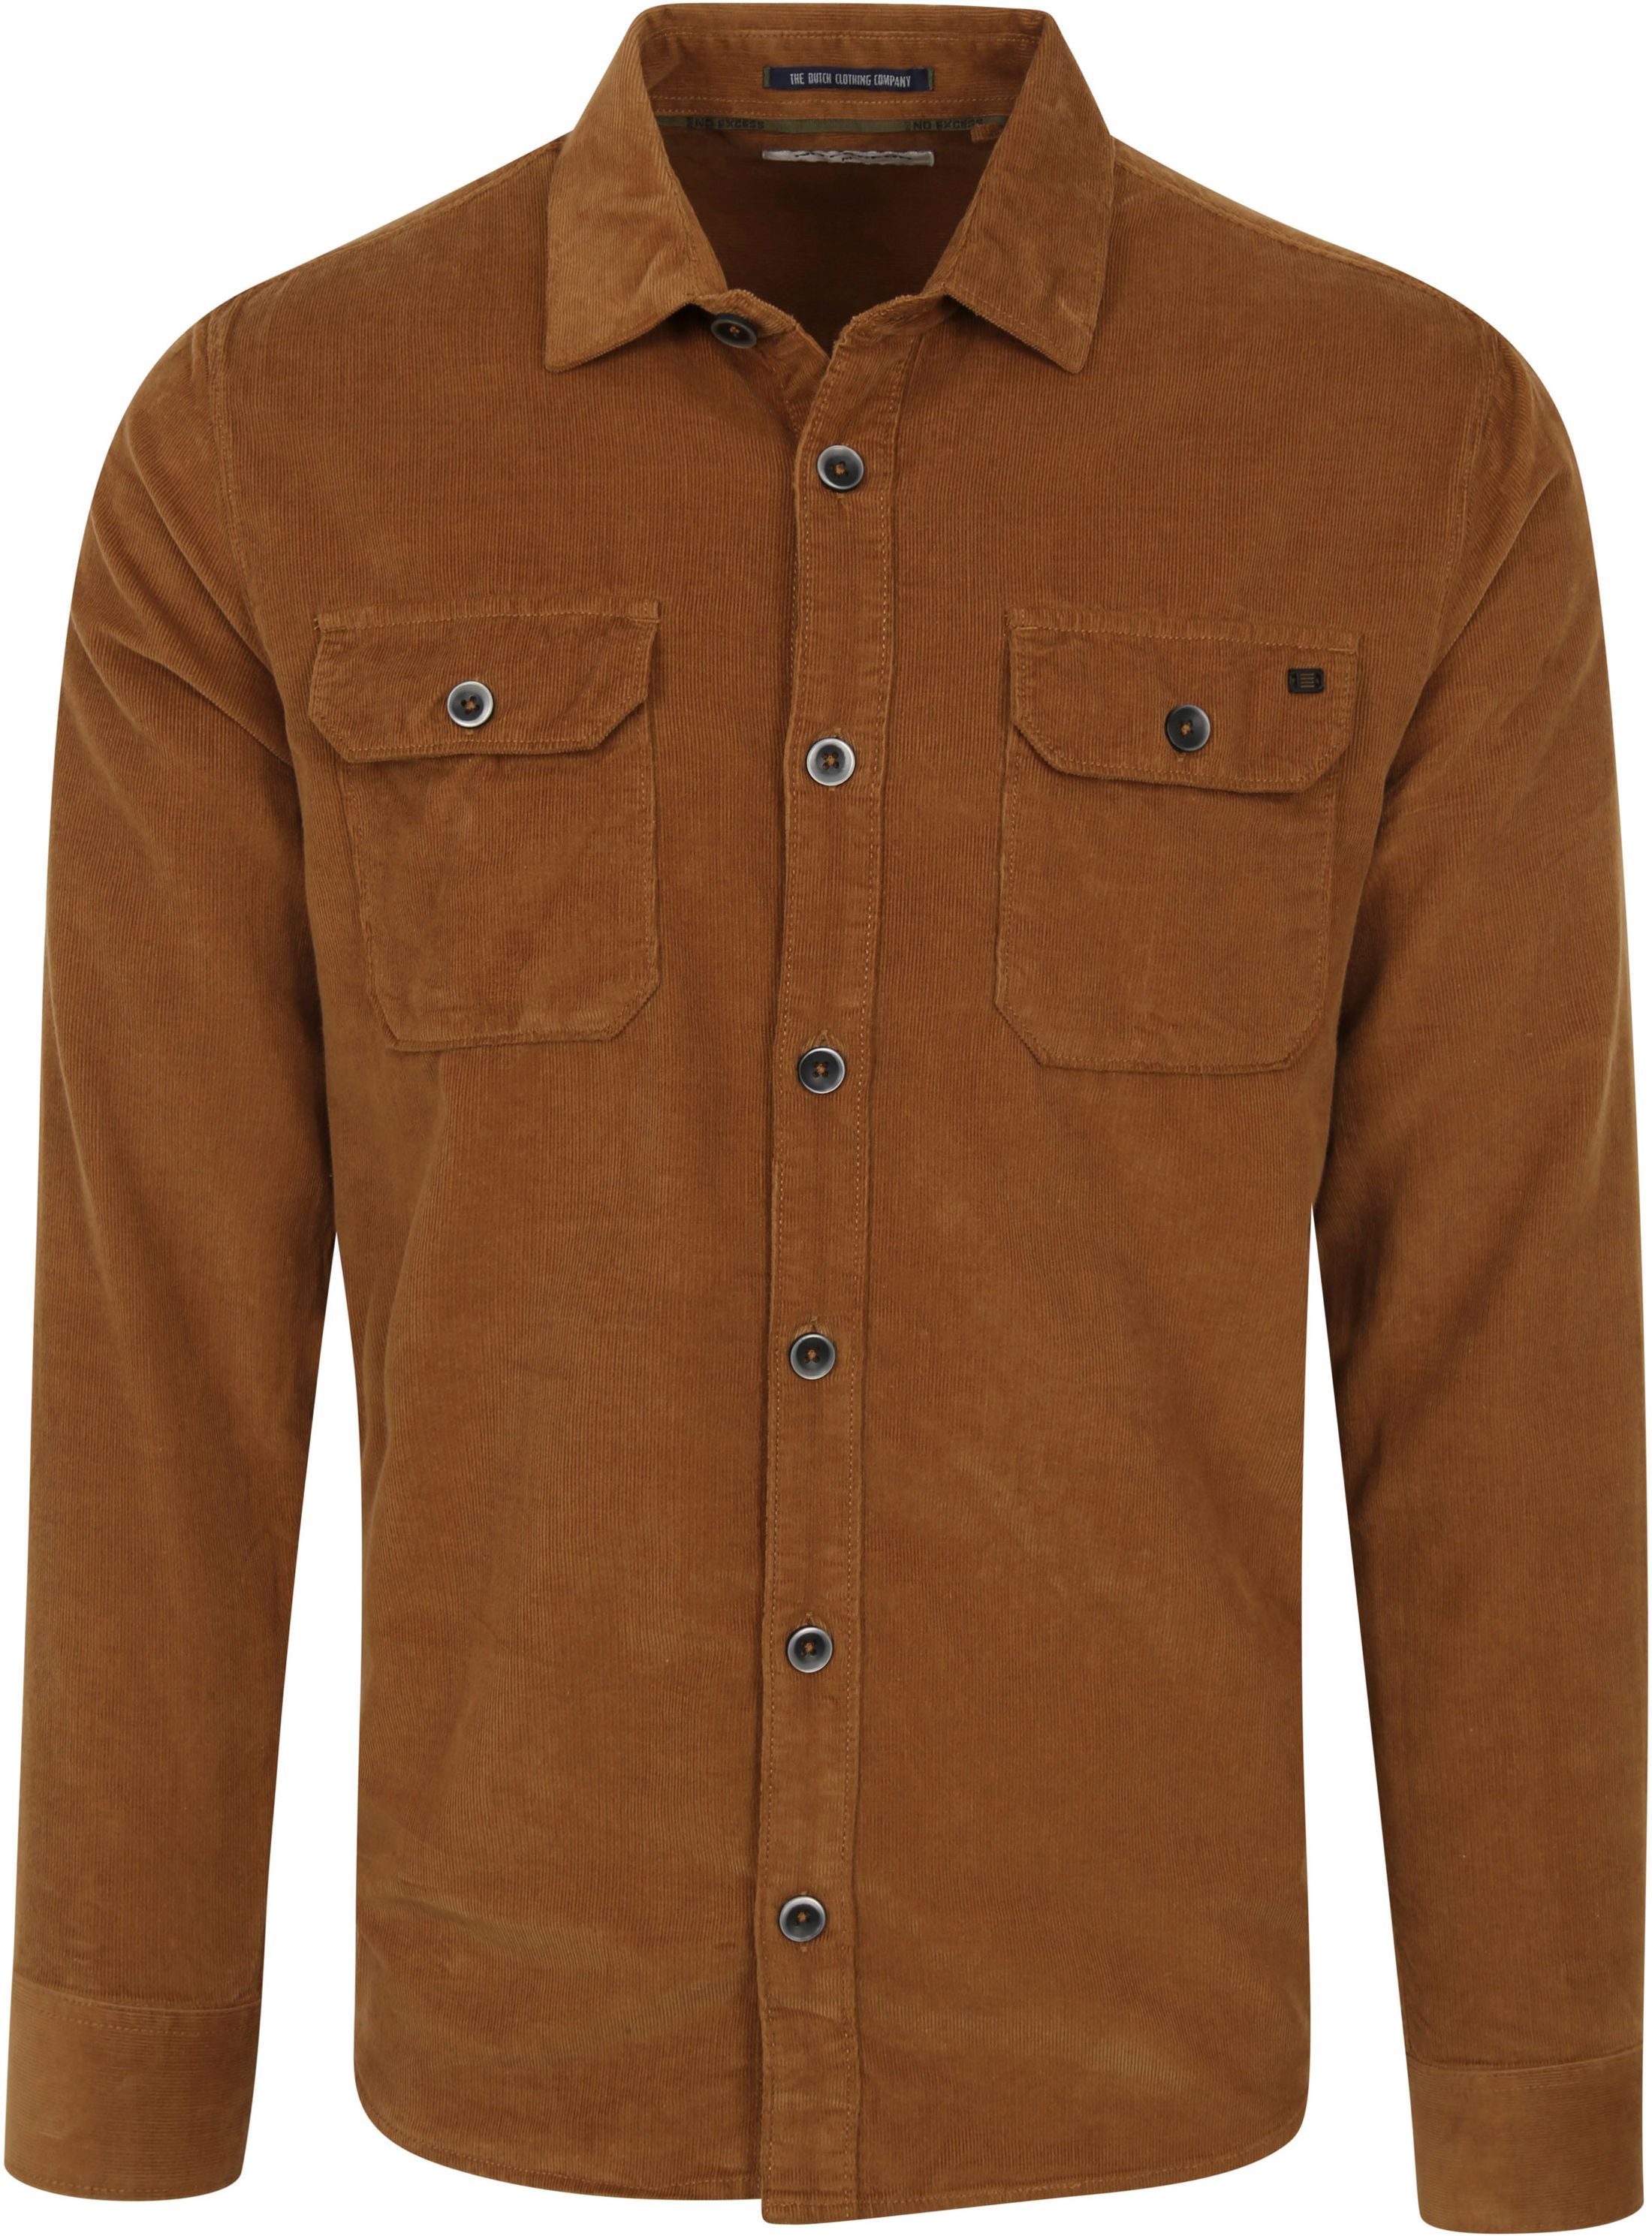 No-Excess Overshirt Corduroy Brown size L